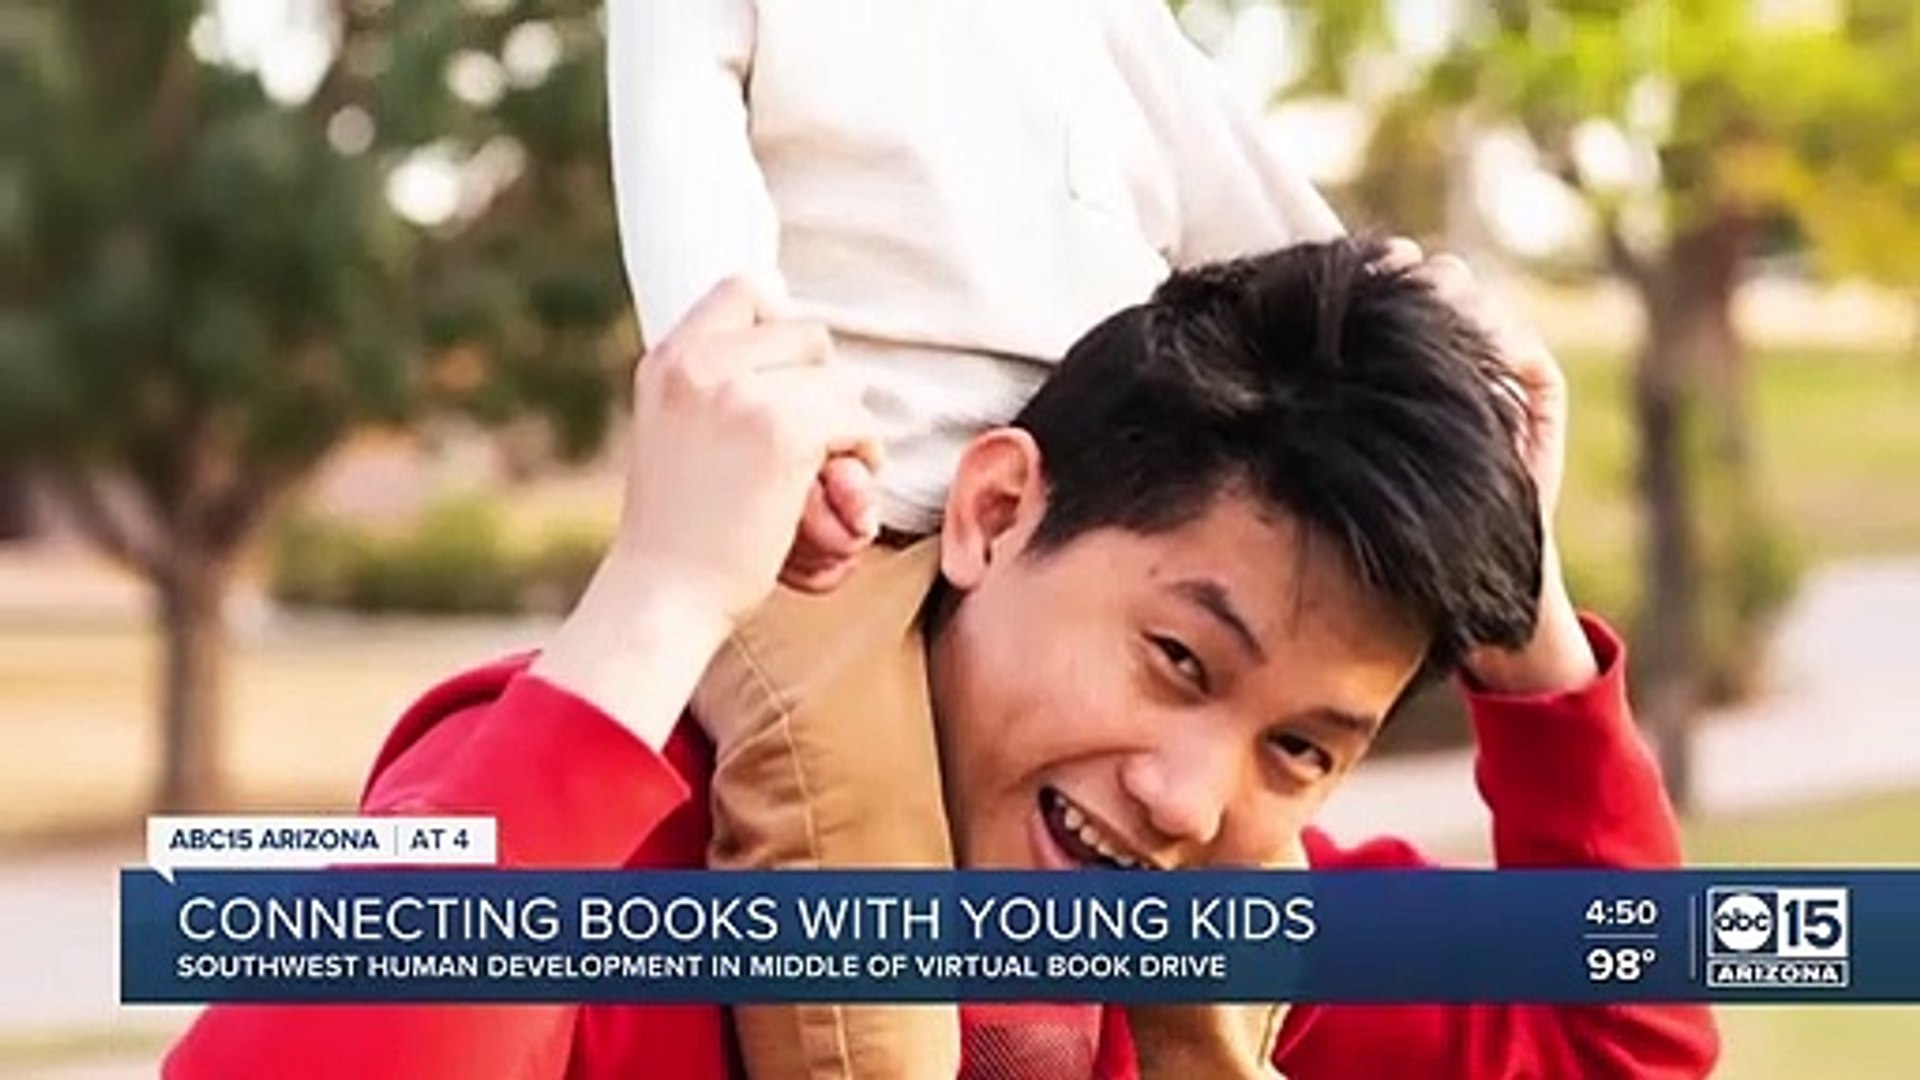 Non-profit connects young kids with books